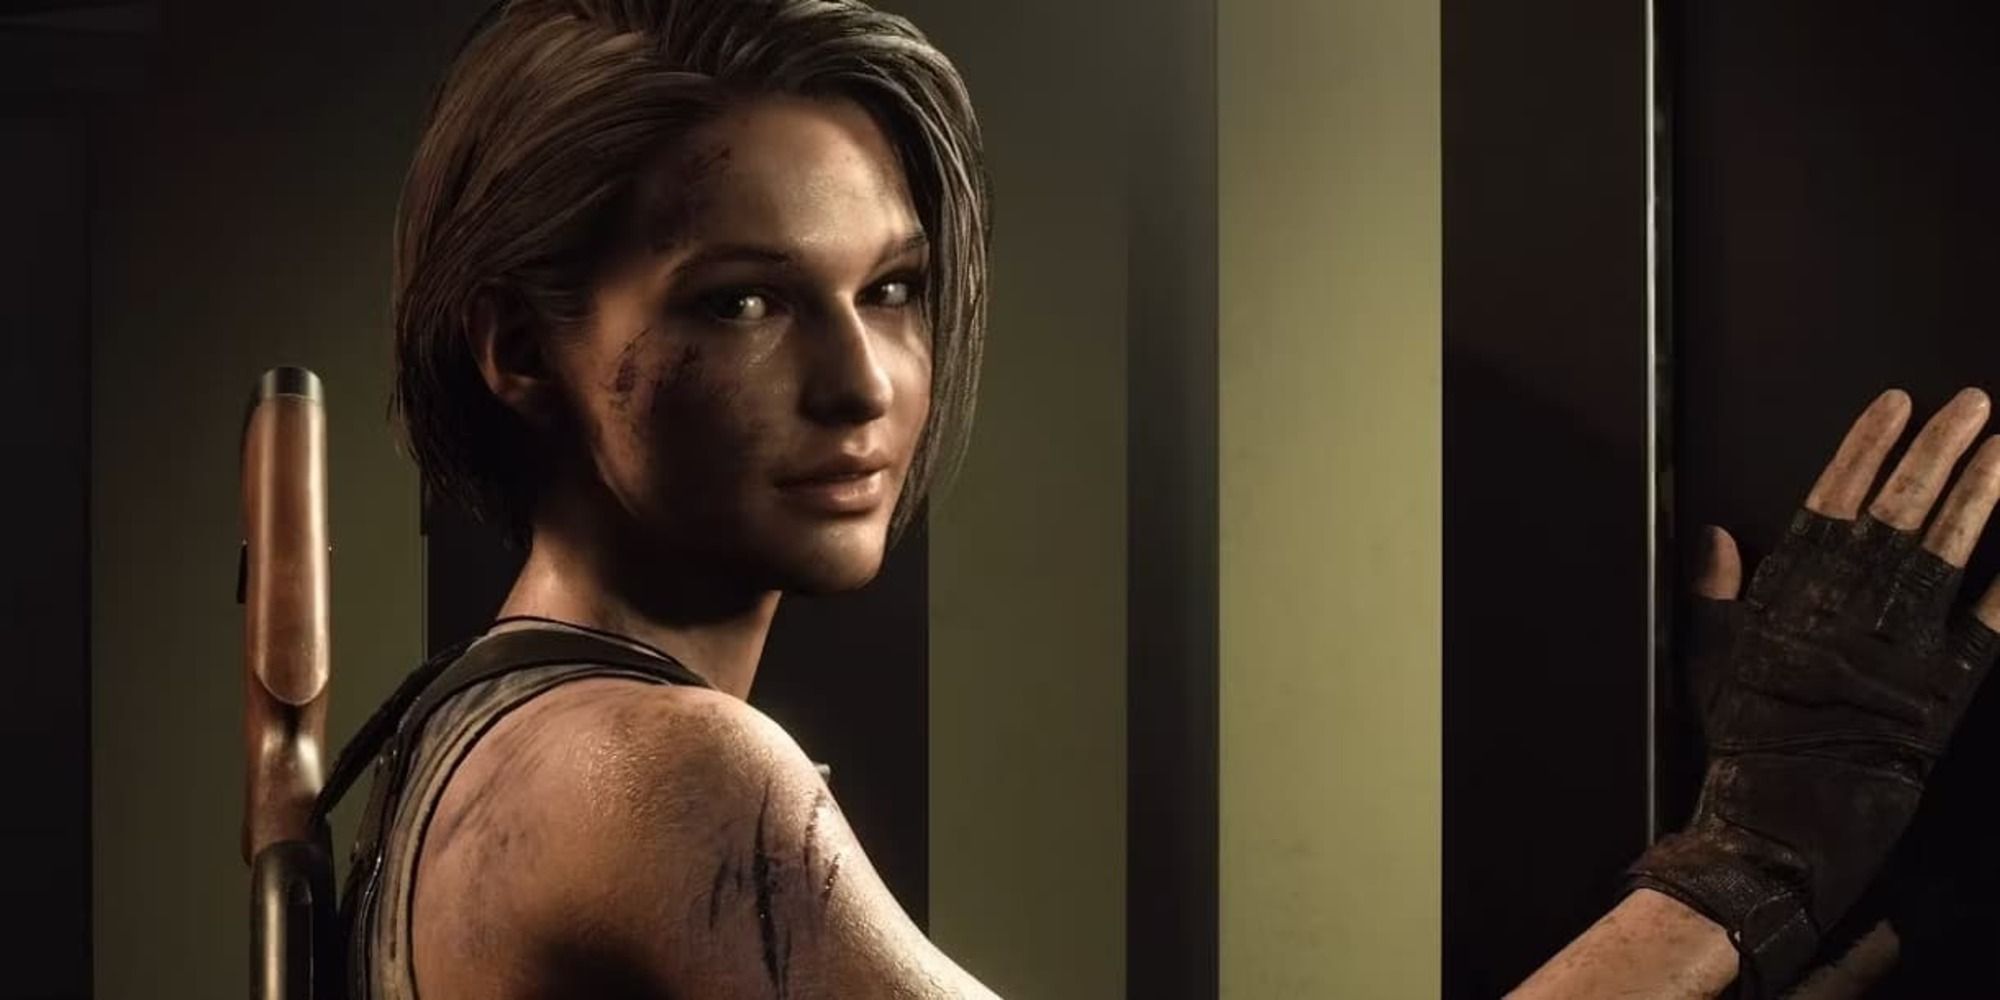 Jill Valentine smiles while looking to her right in Resident Evil 3 